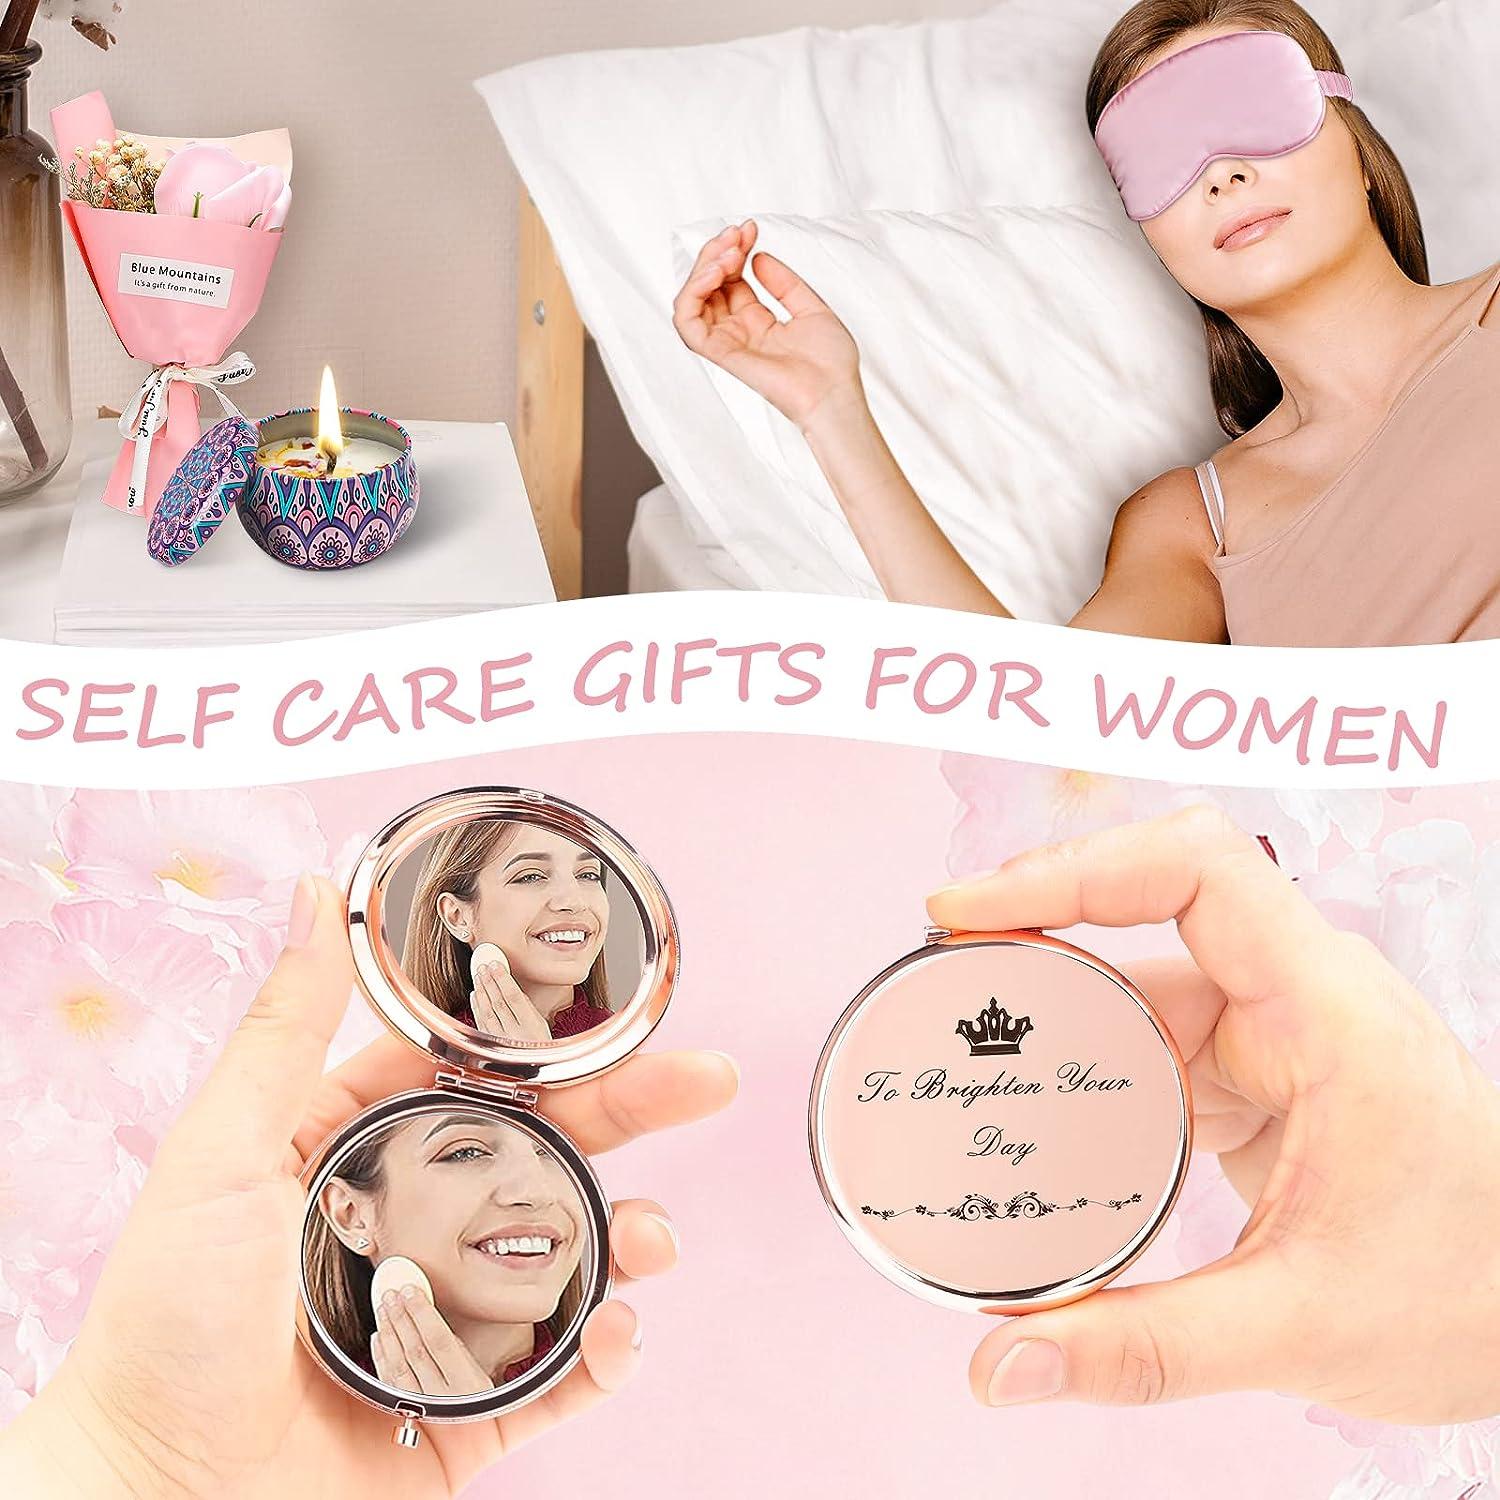  Gifts Box for Women Unique Self Care for Mom Best Friend  Stainless Steel Basket Female Her Sister Girlfriend Wife Personalized  Thinking of You Relaxation Package Birthday/Get Well Soon Gift Ideas 